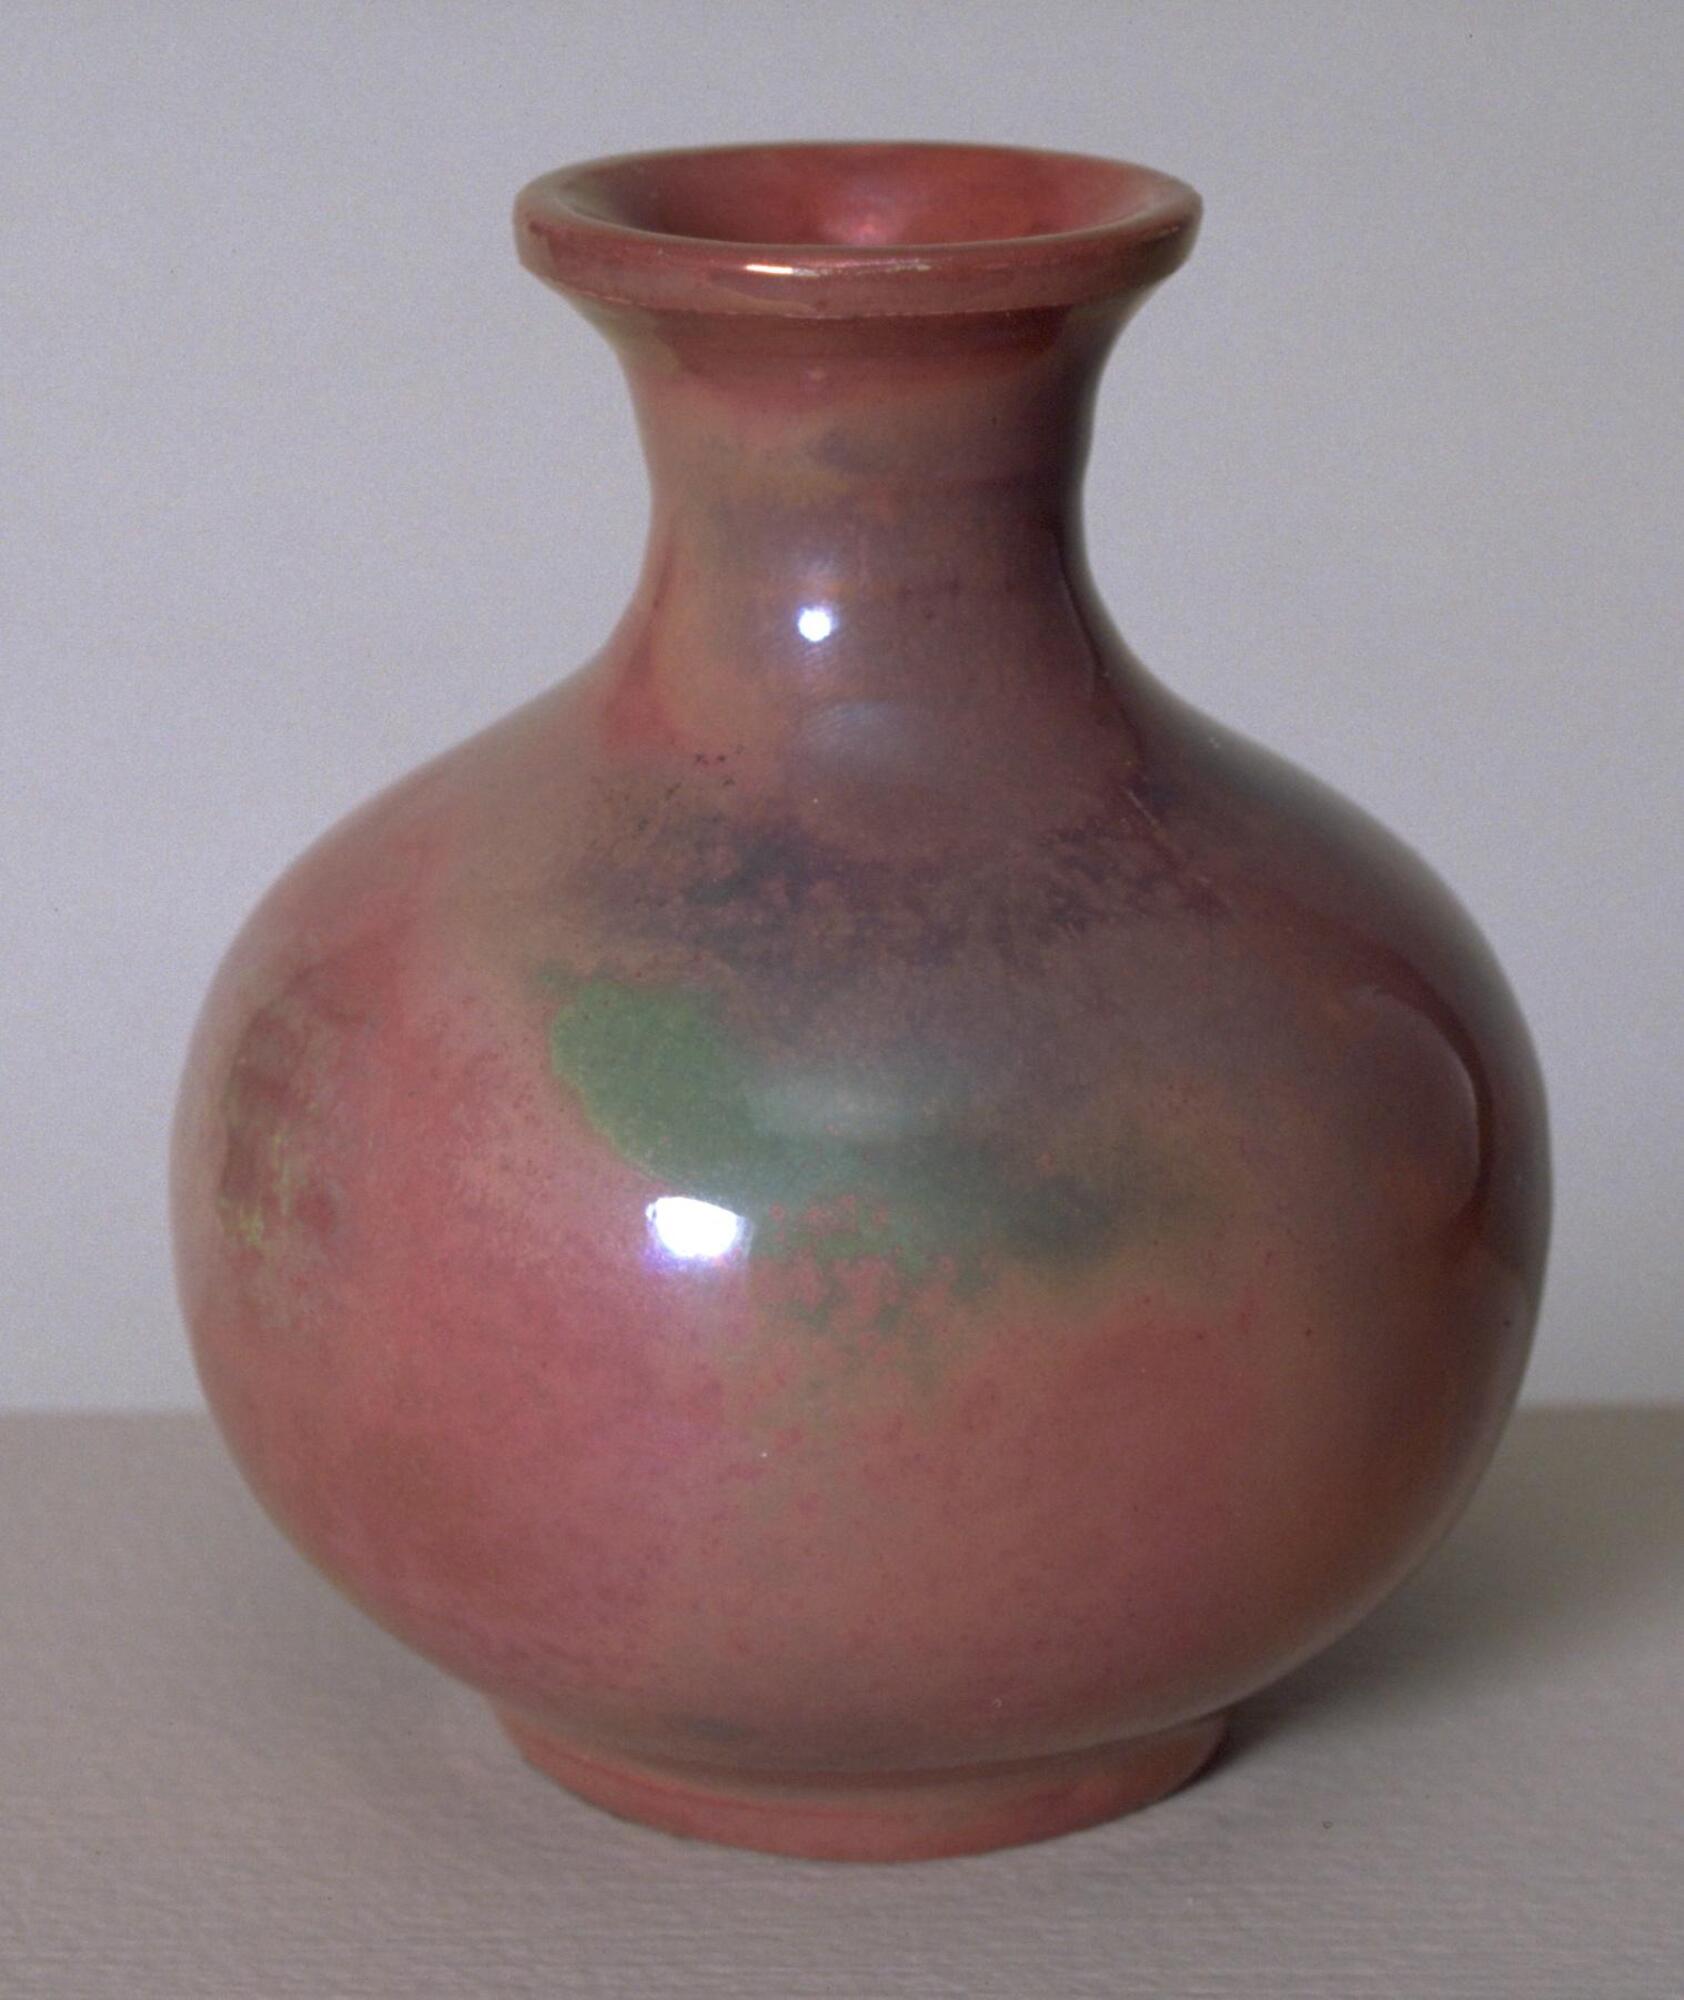 Ceramic bottle-shaped footed vessel with bulbous body, narrow neck and flared mouth covered in an iridescent glaze over a semi-matte glaze that creates an appearance of irregular patches of color in greens and blues with an overall rose color.